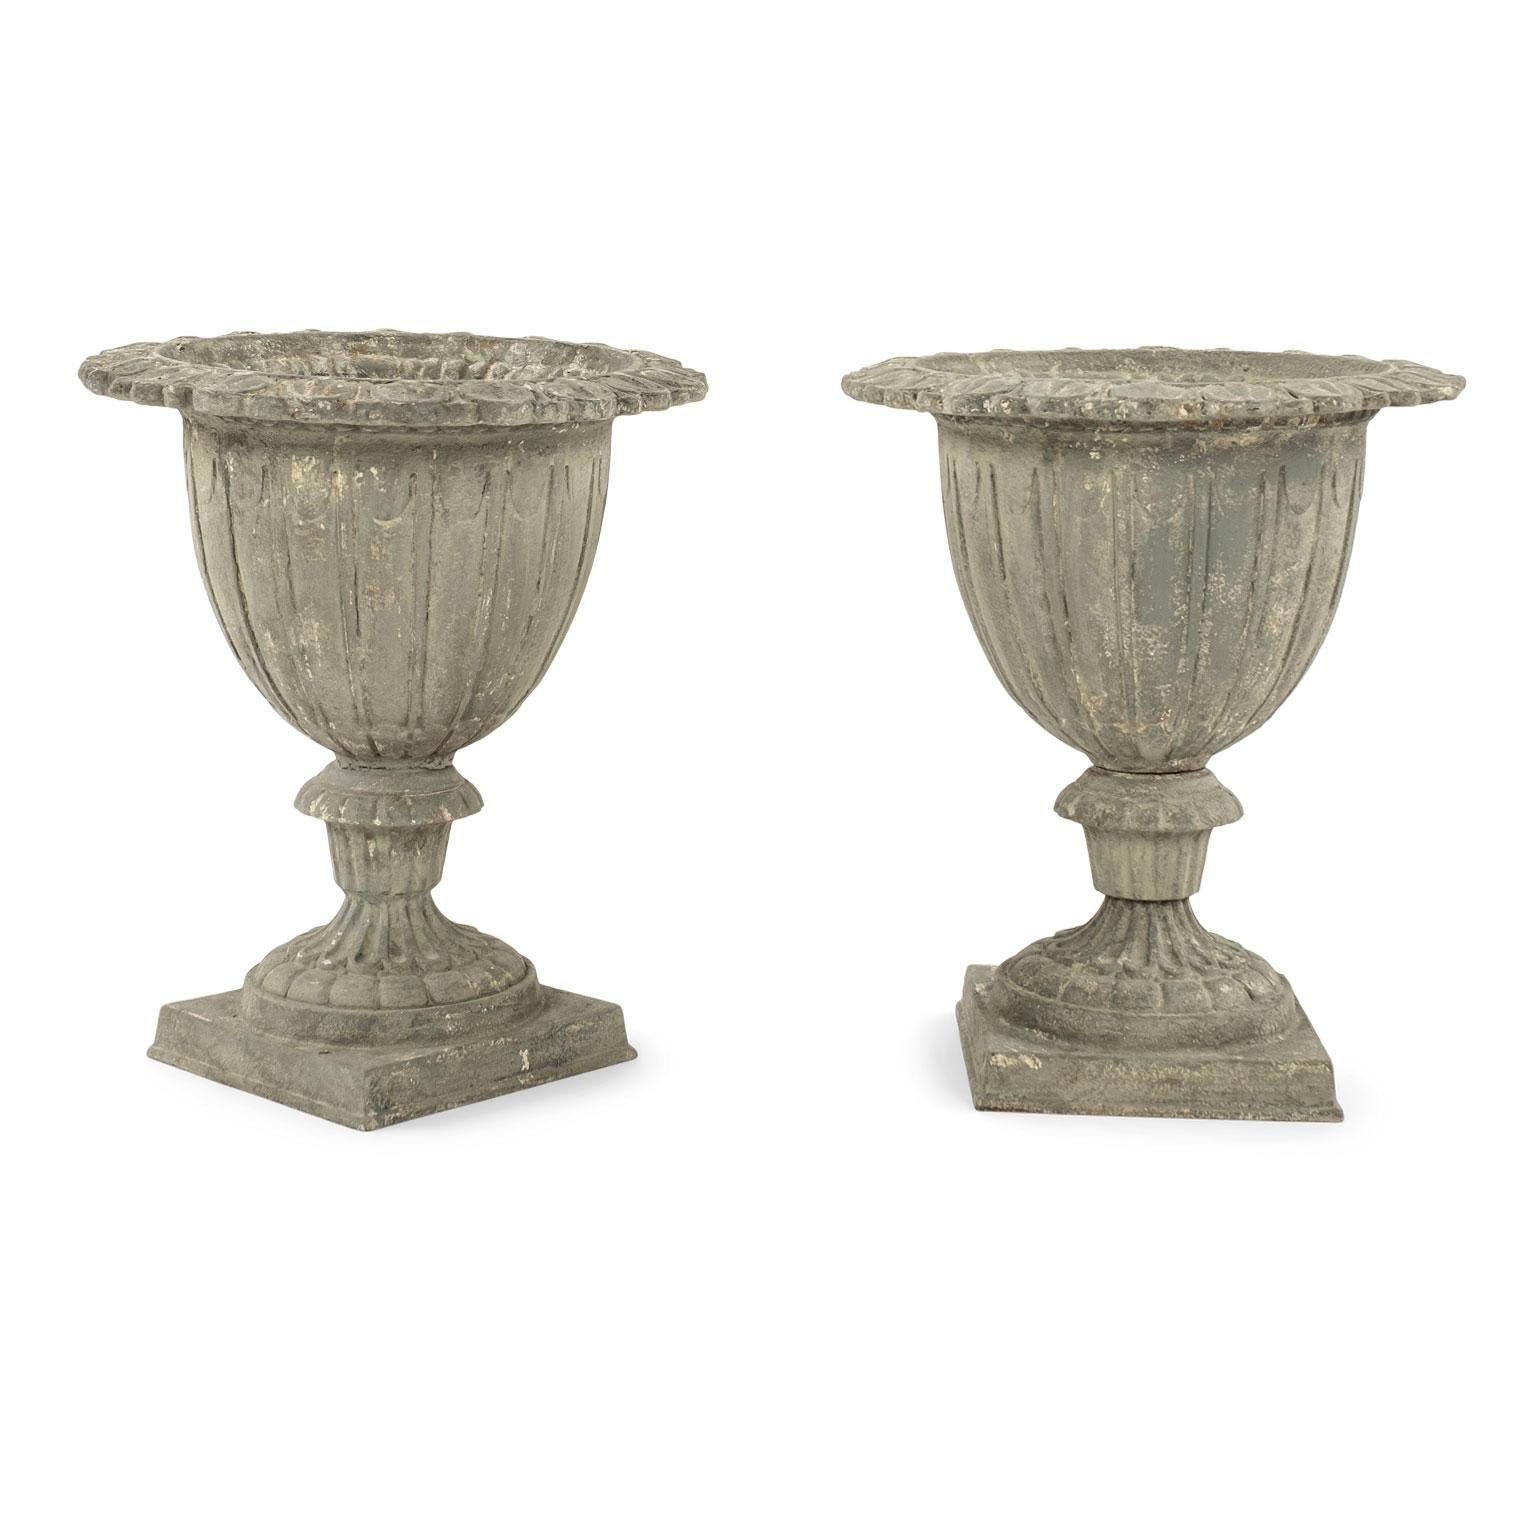 Pair of French gray-painted cast iron garden urns circa 1910. They feature an unusual, whimsical shape, beautifully decorative rims and a rich patina. Sold together and priced $4,400 for the pair.

Note: Original/early finish on antique and vintage